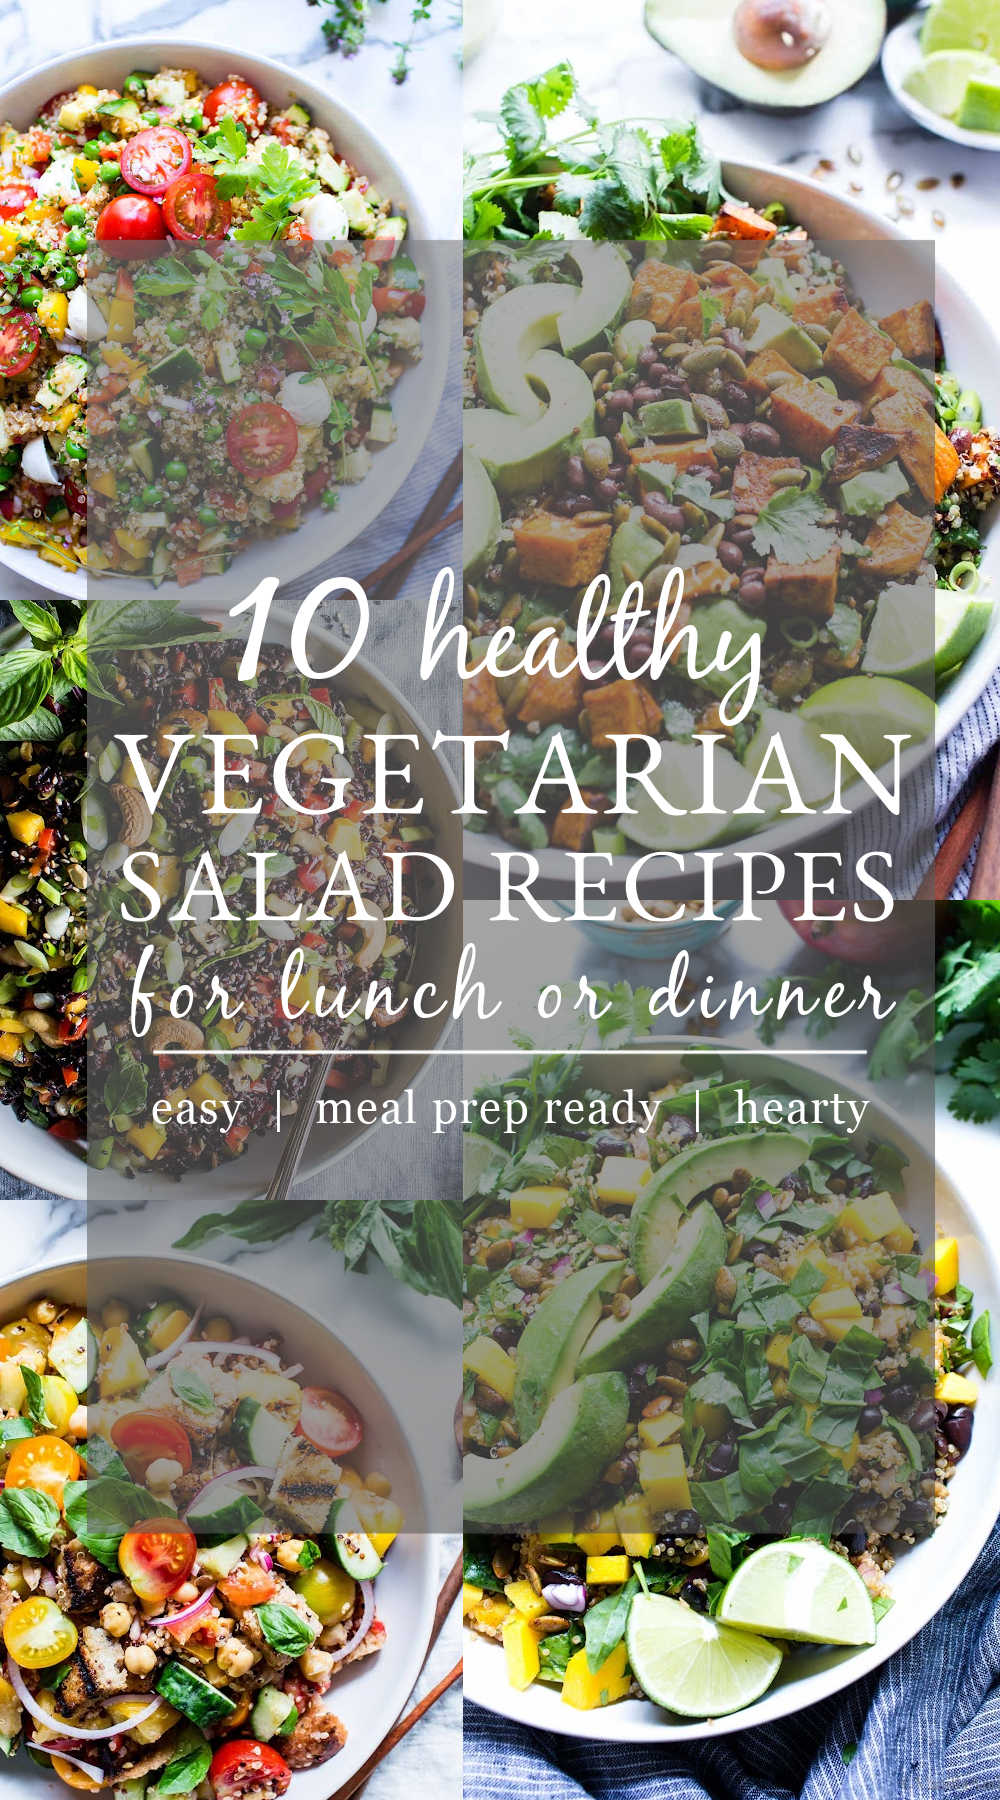 10 Healthy Vegetarian Salad Recipes for lunch or dinner cover with images of those salad recipes.